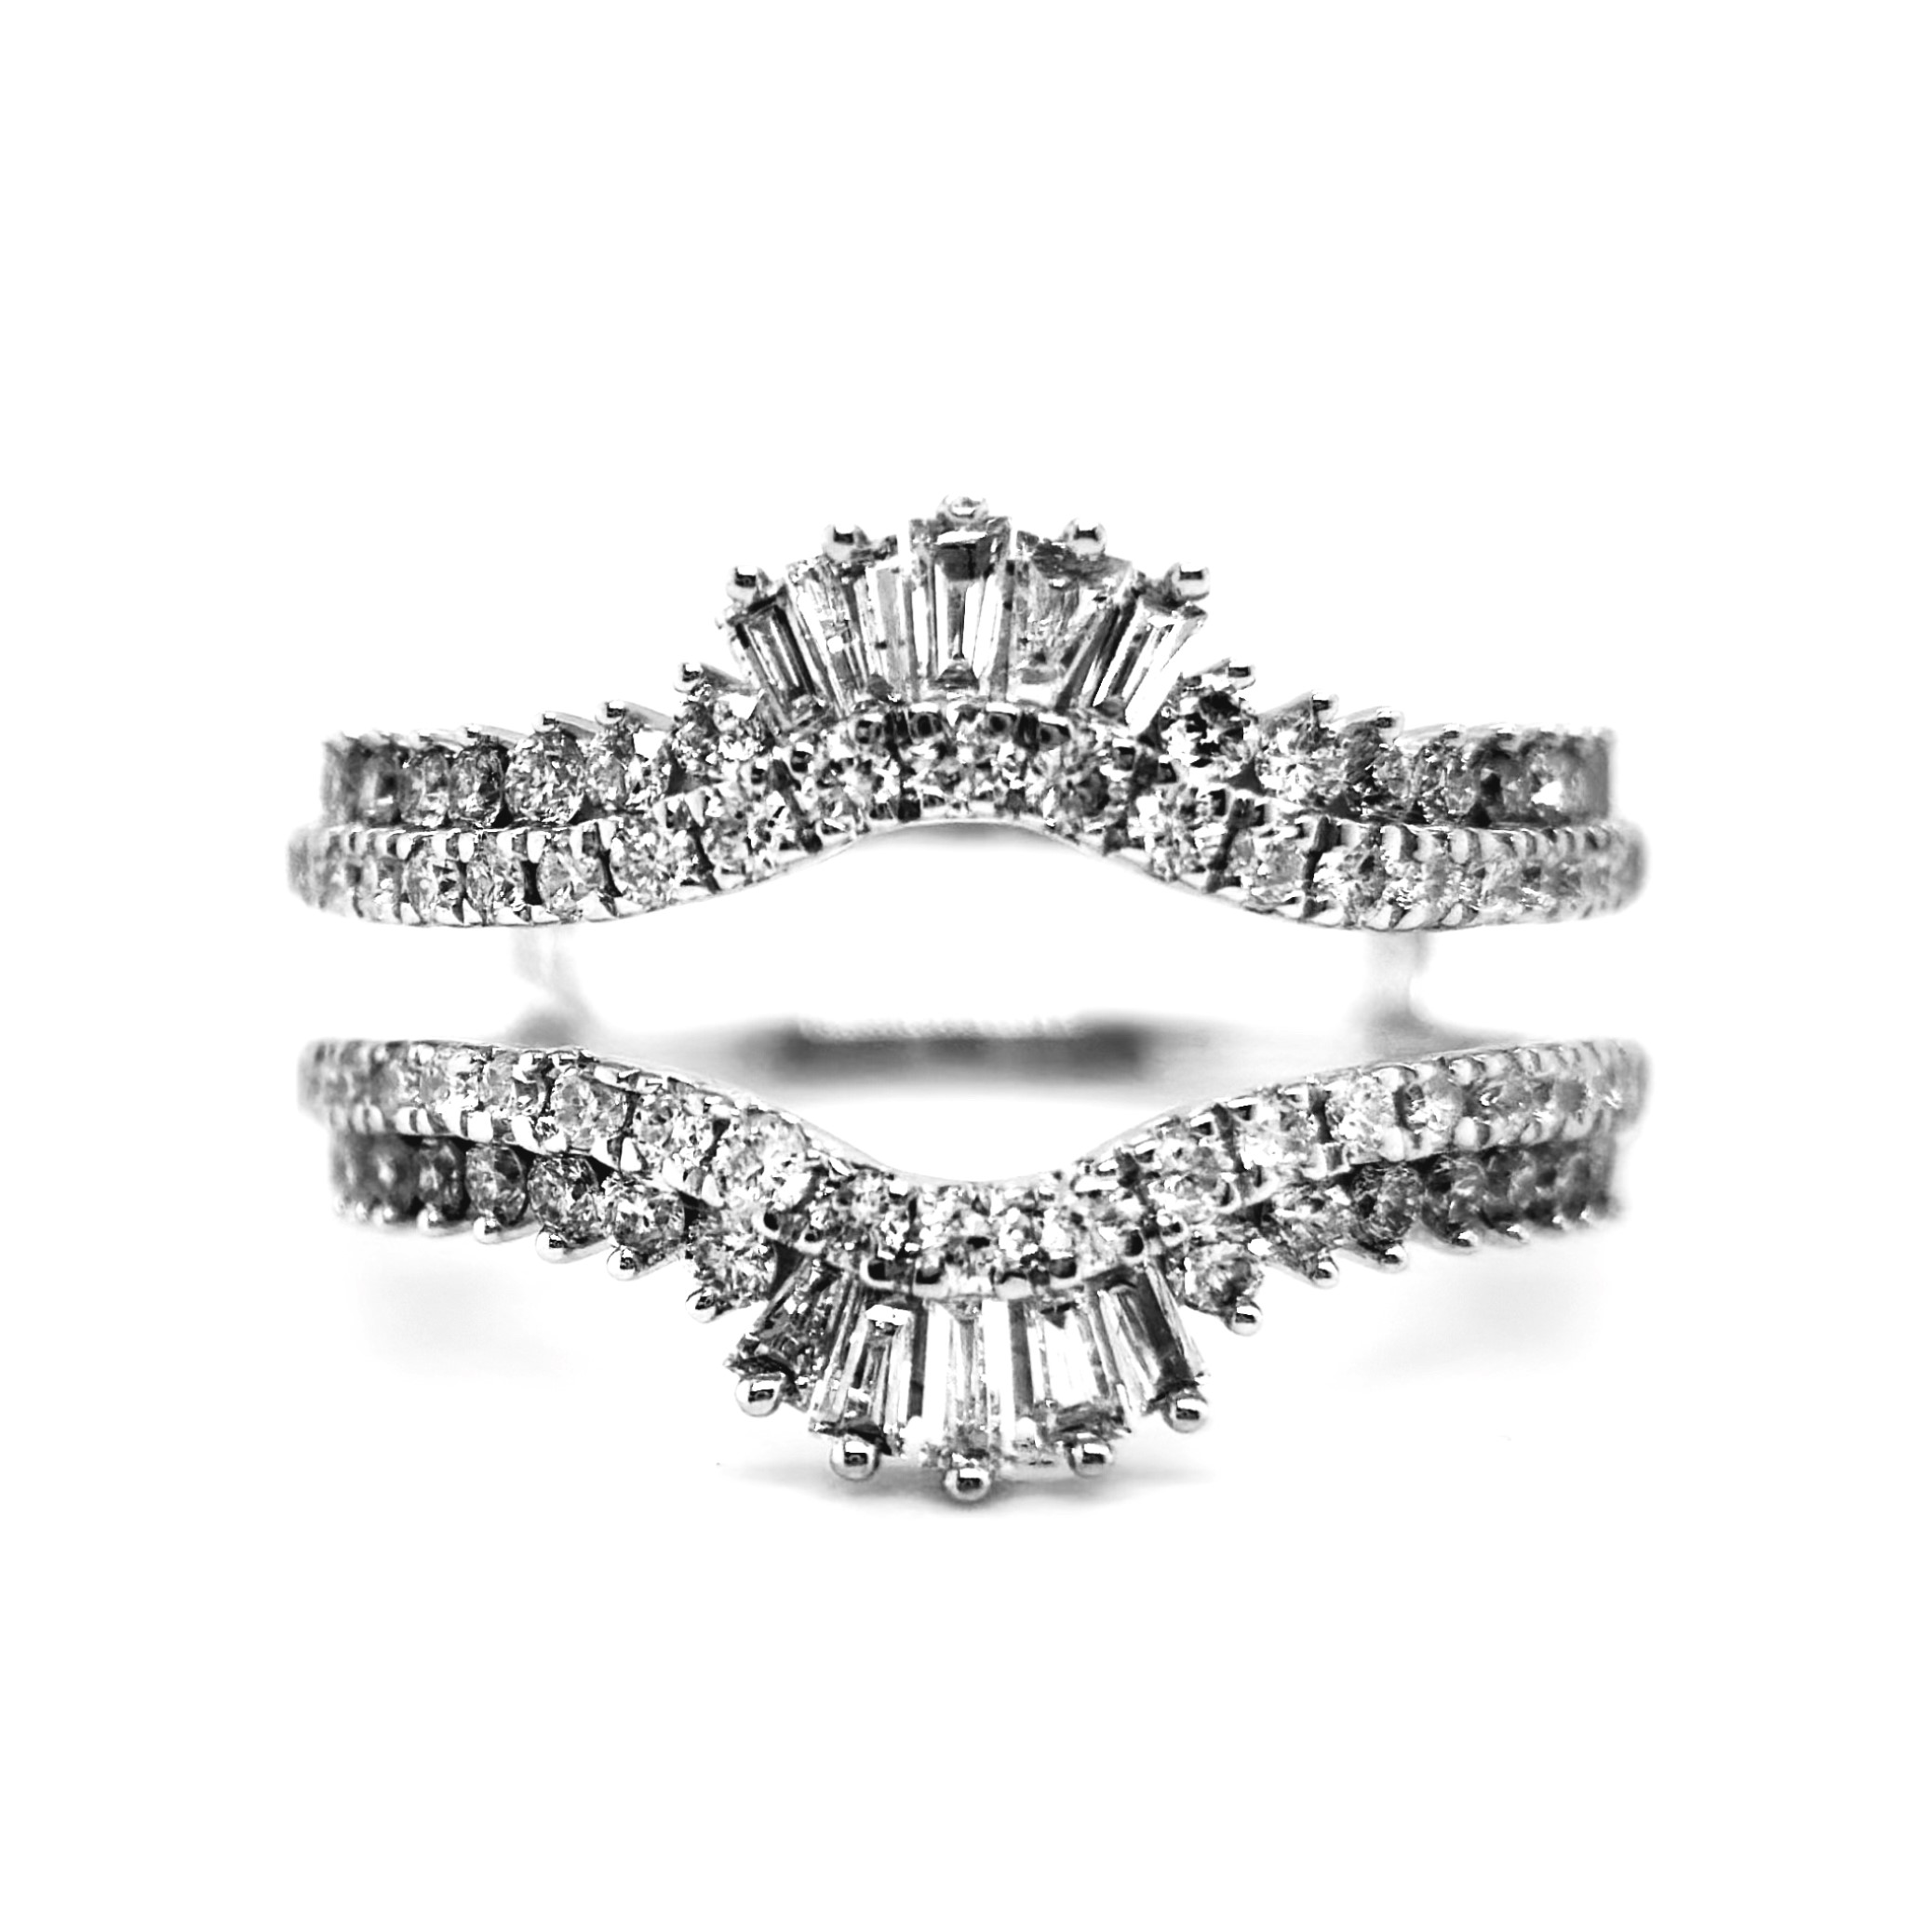 Buy Wedding Ring Guard Online In India - Etsy India